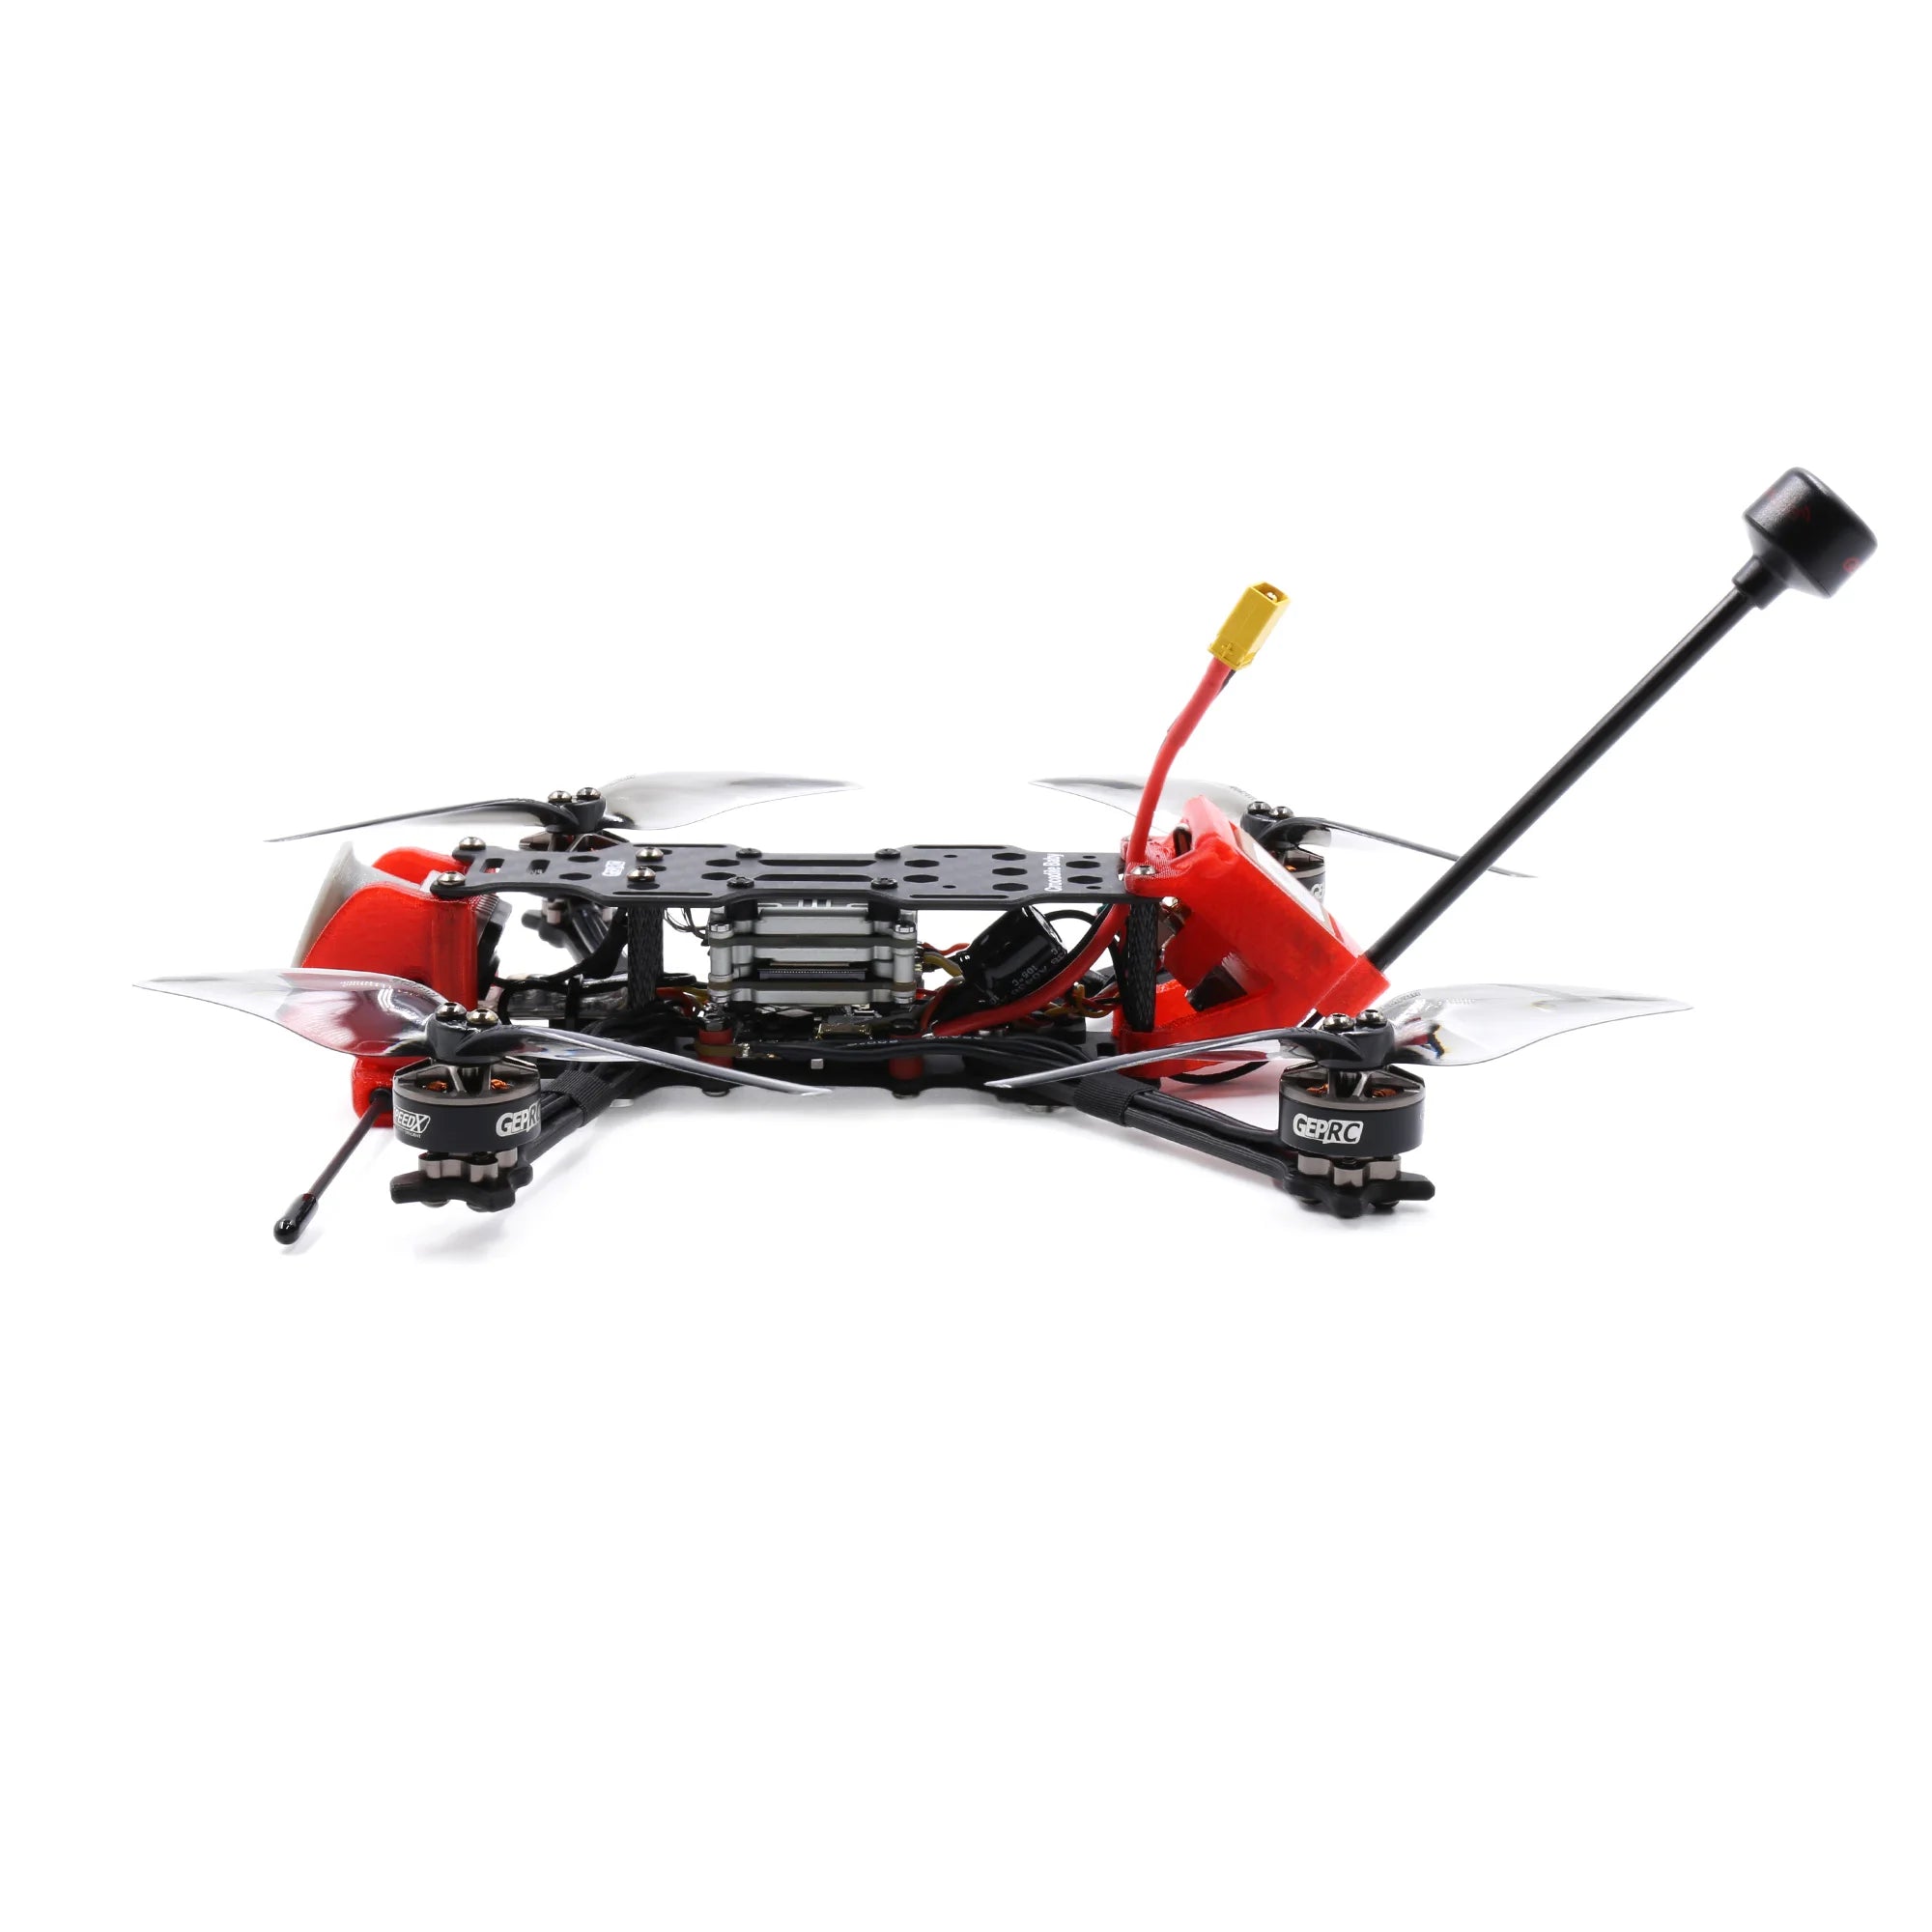 GEPRC Crocodile Baby 4 FPV Drone, the minimum takeoff weight is within 250g,which conforms to FAA rules .